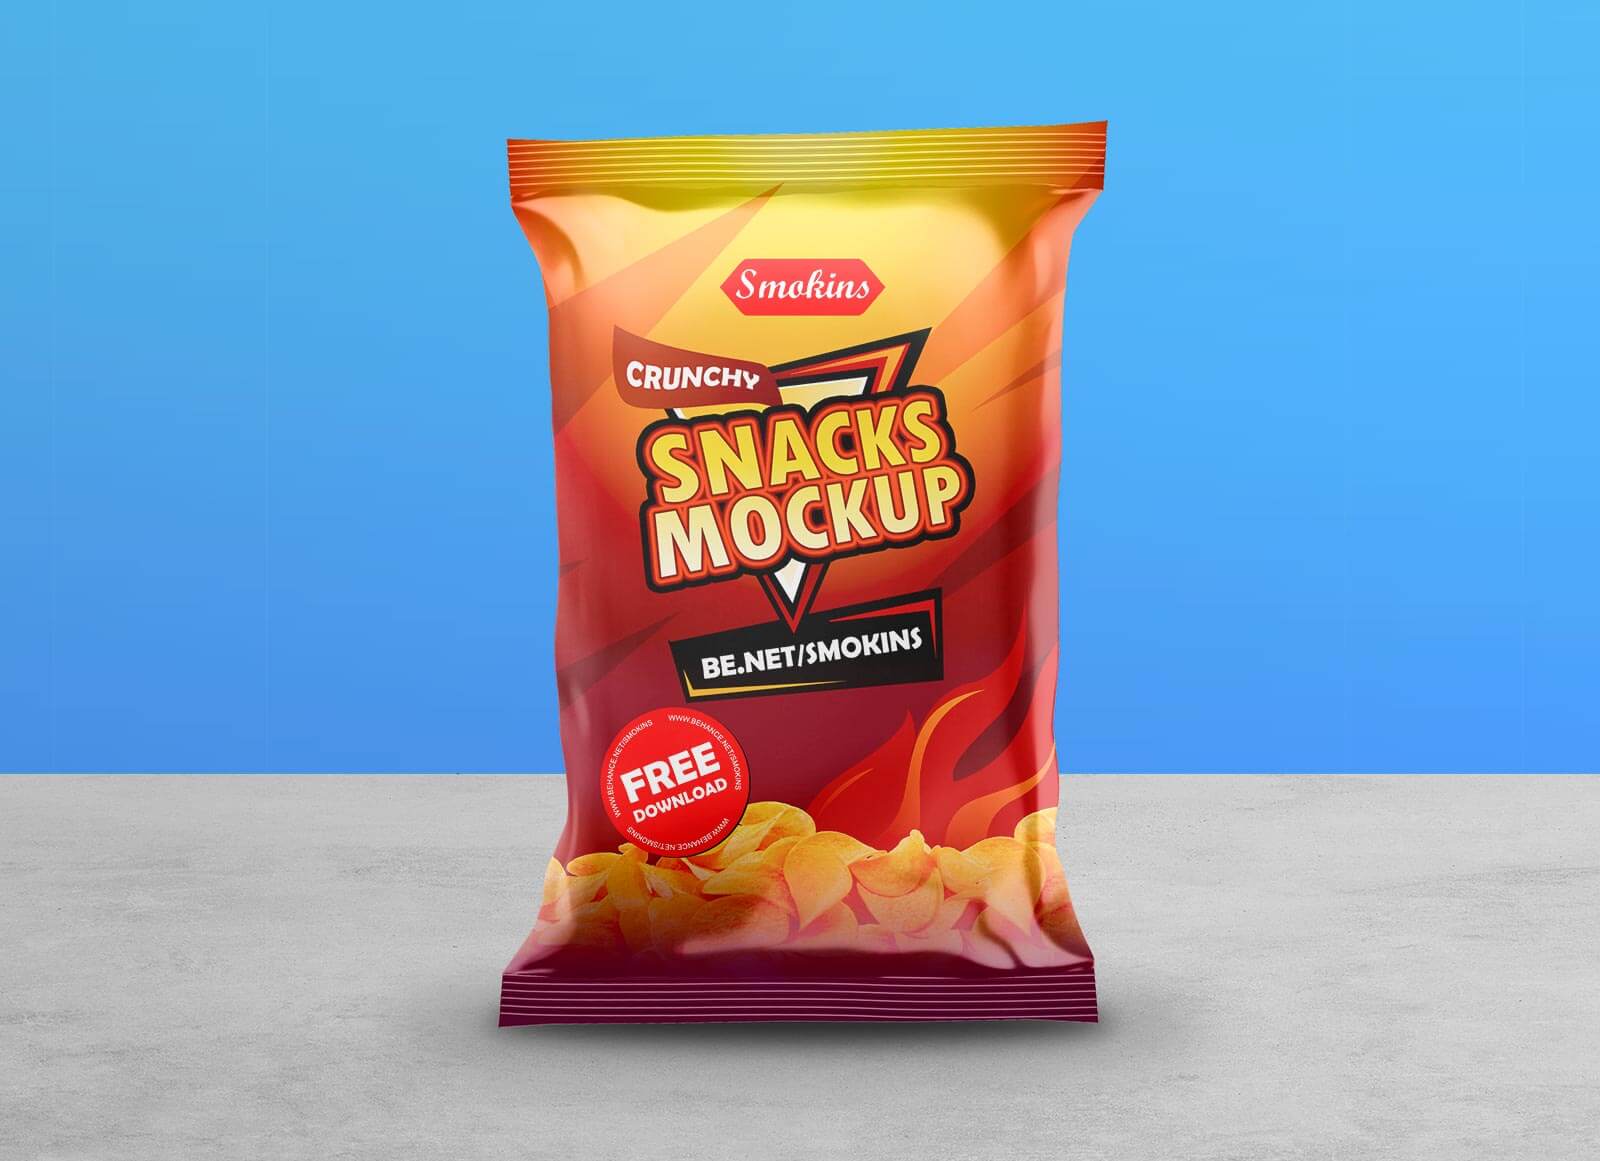 Free-Potato-Chips-Snack-Packaging-Mockup-PSD